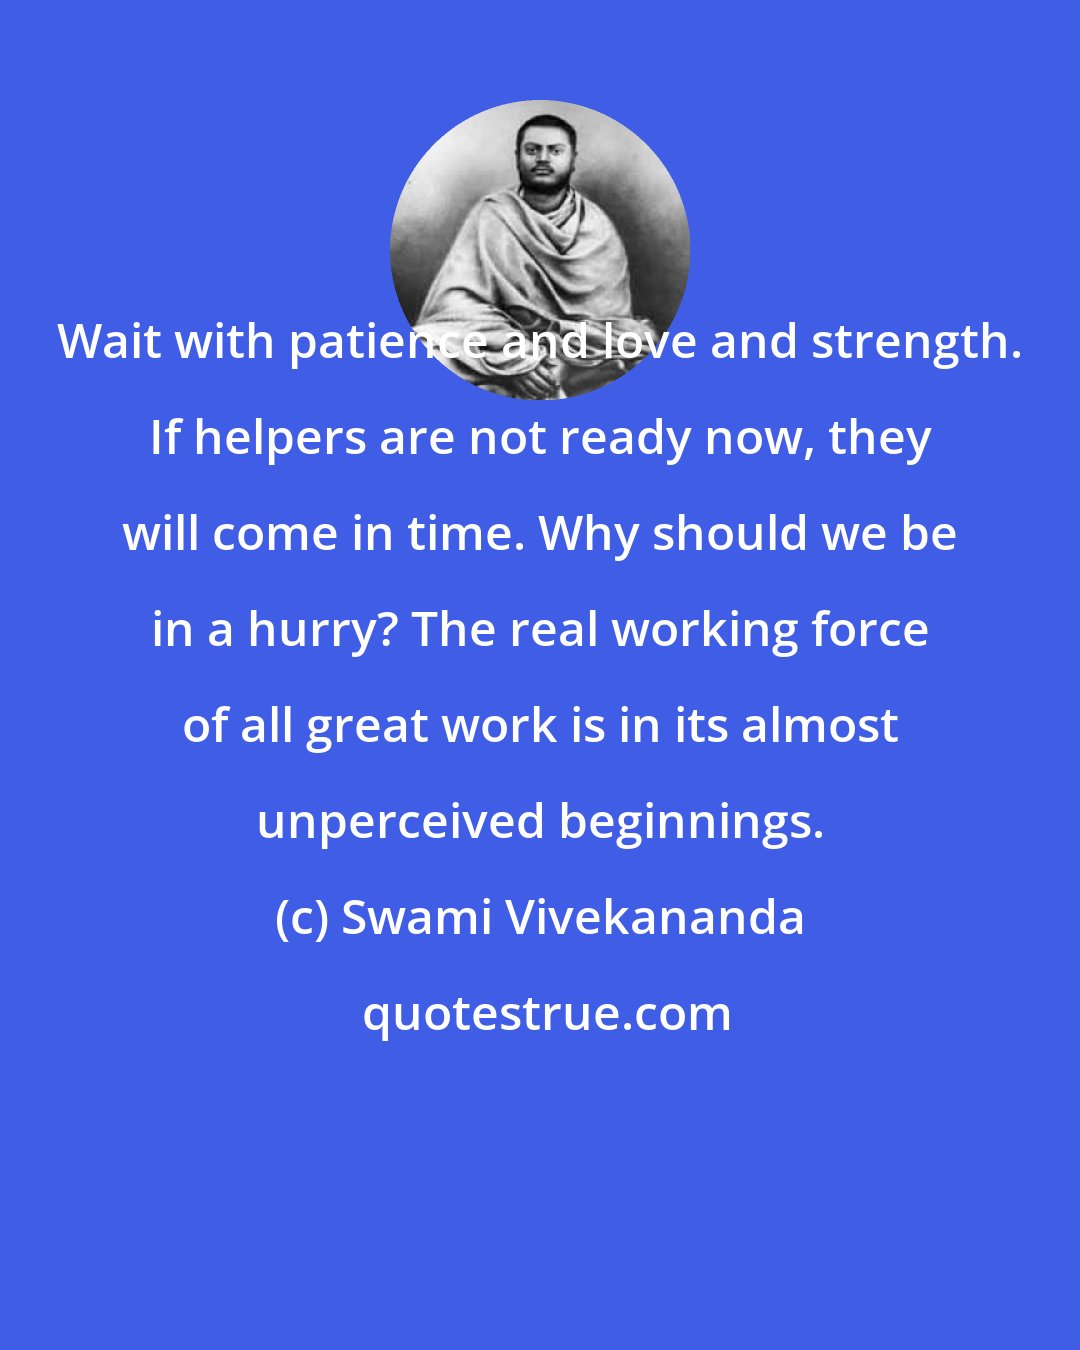 Swami Vivekananda: Wait with patience and love and strength. If helpers are not ready now, they will come in time. Why should we be in a hurry? The real working force of all great work is in its almost unperceived beginnings.